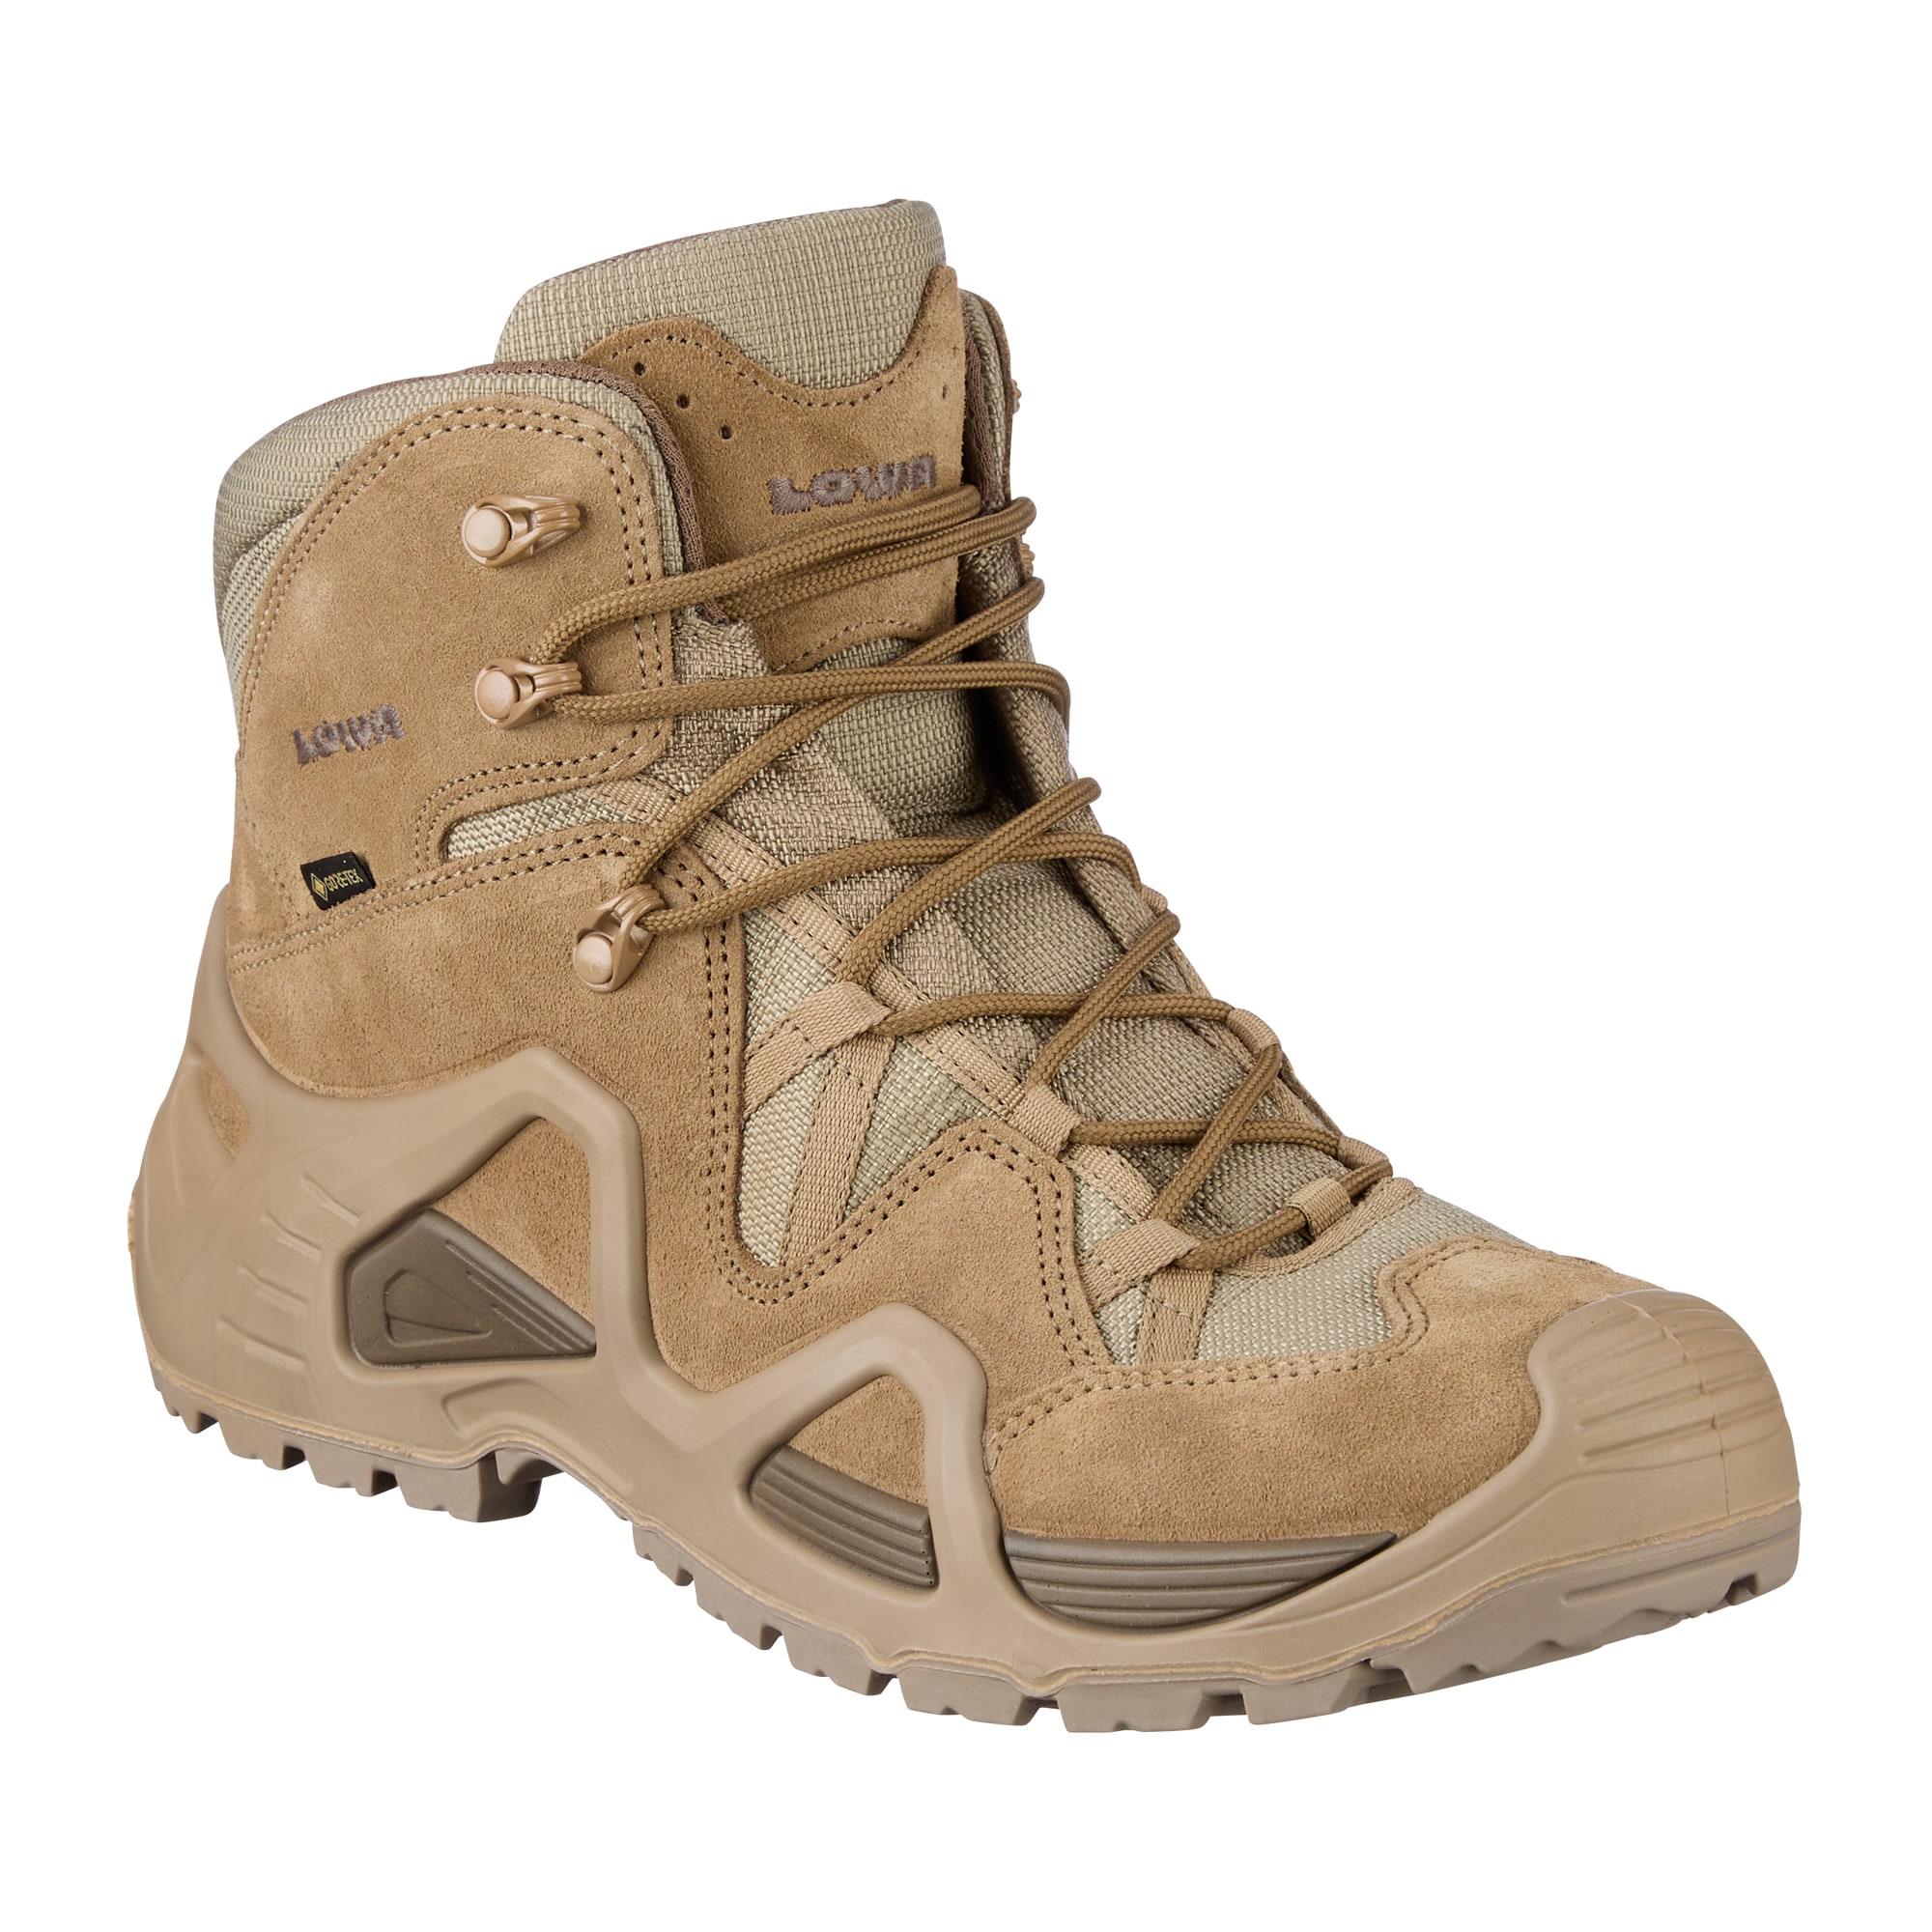 Boots LOWA Zephyr Mid TF Ws coyote